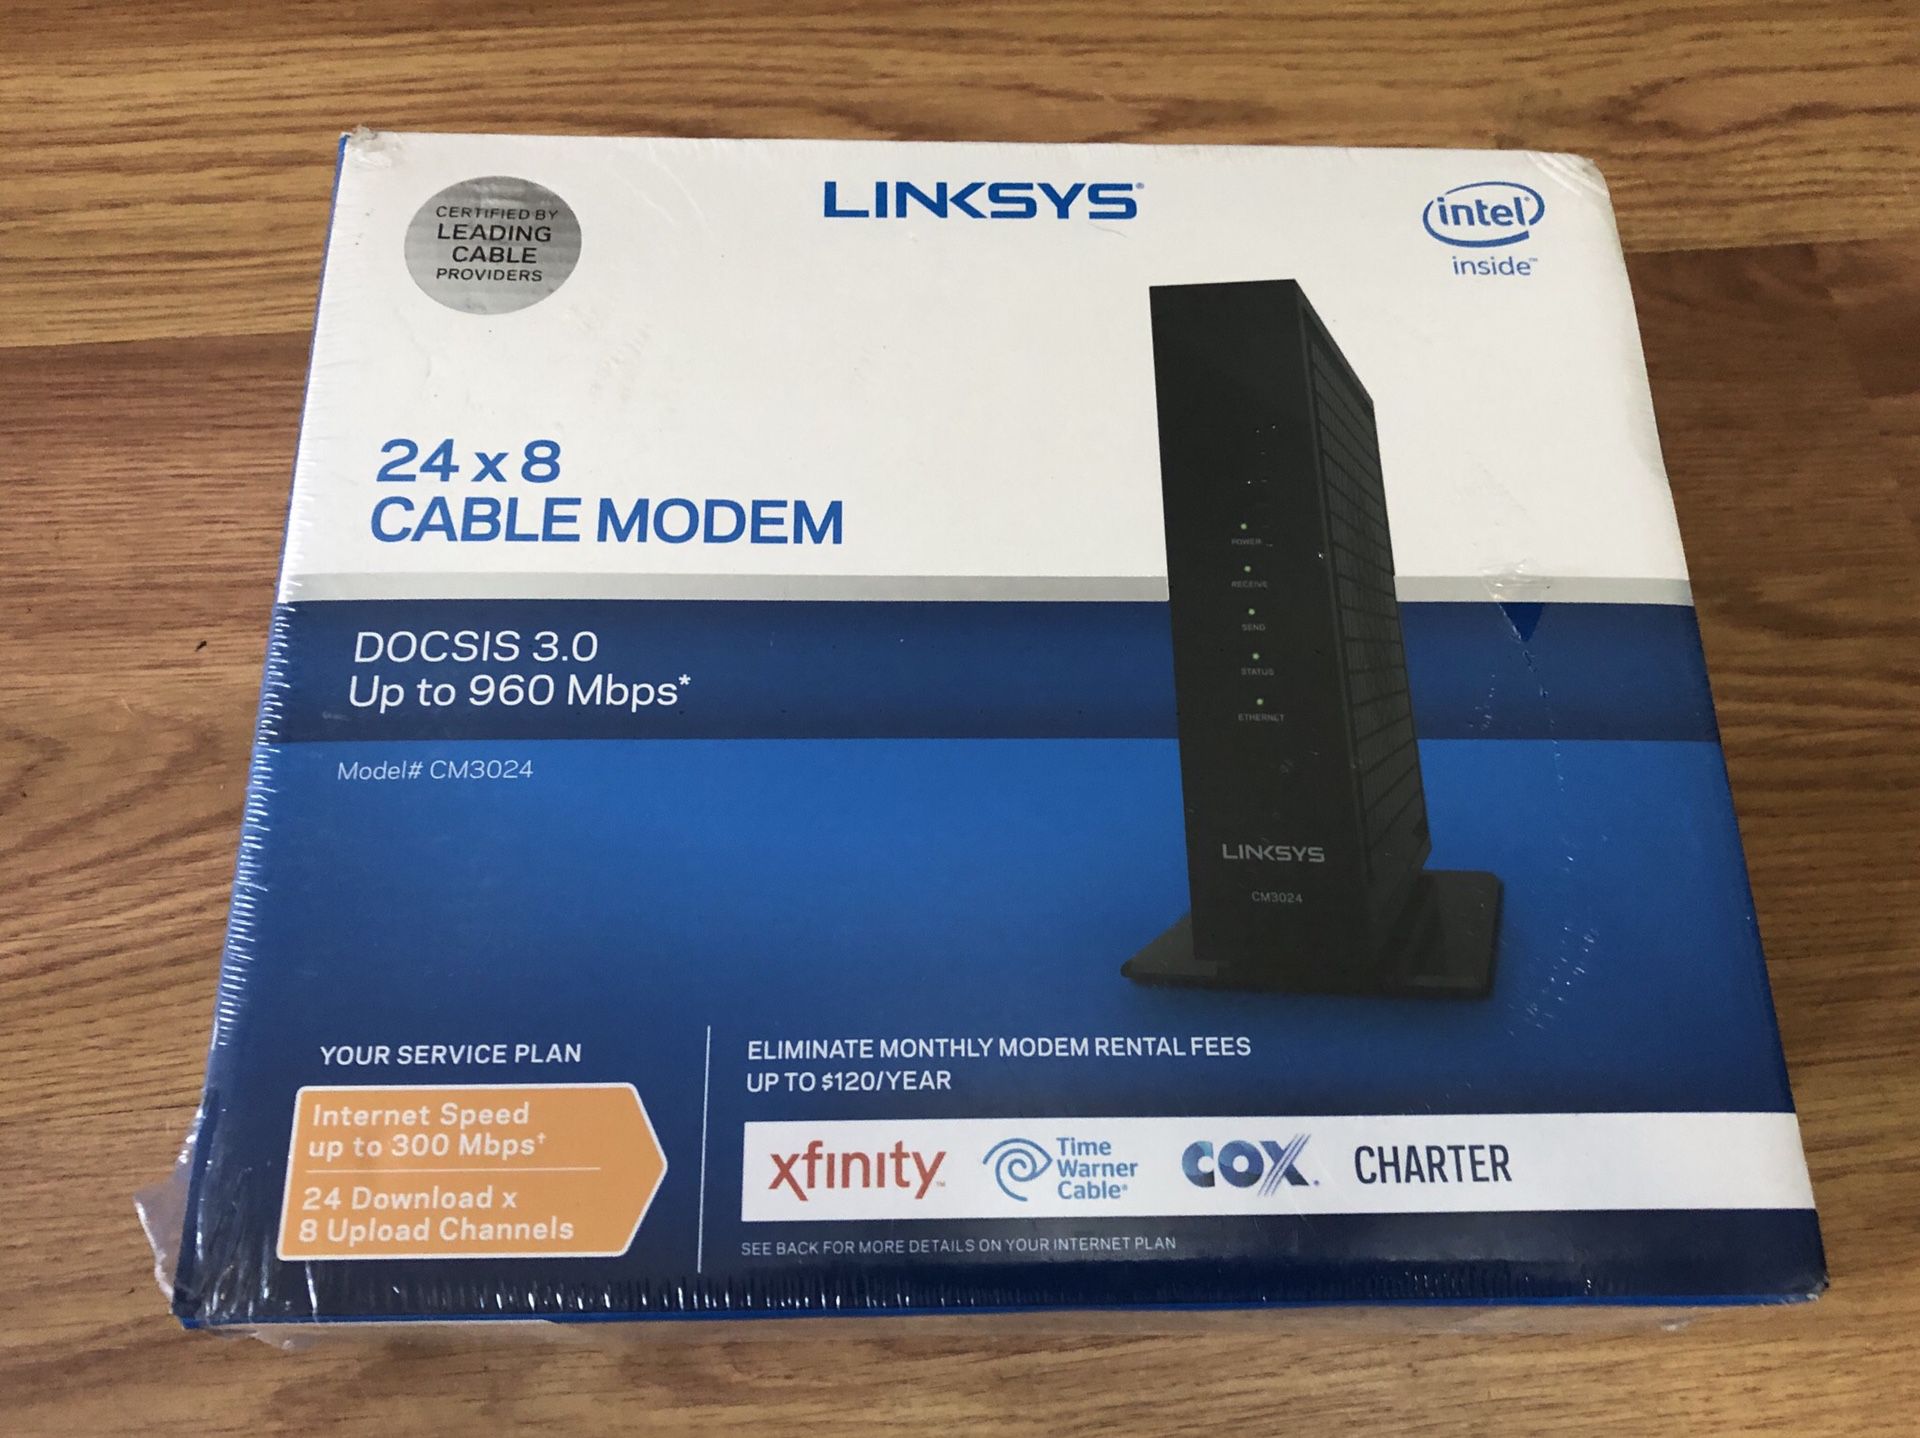 Linksys cable modem